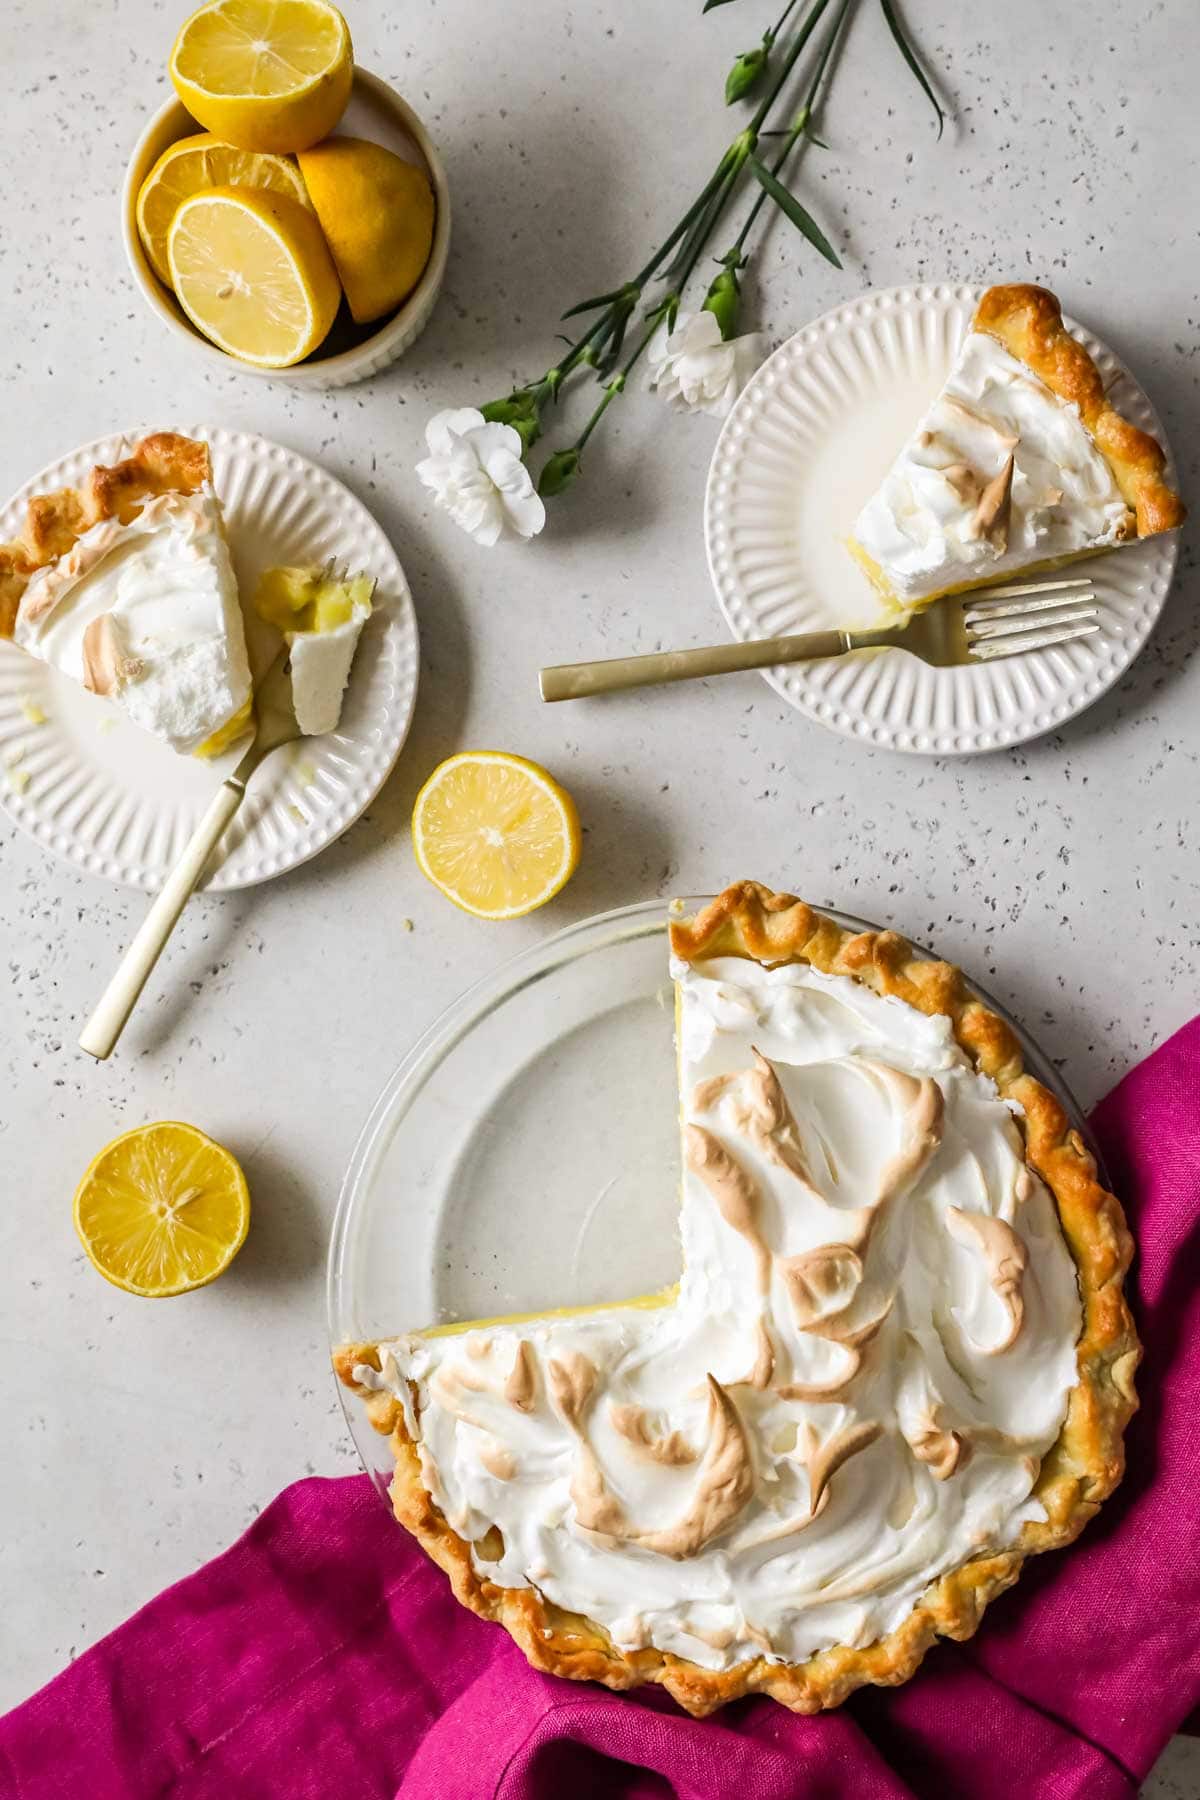 Overhead view of a lemon meringue pie with two slices removed and placed on plates.